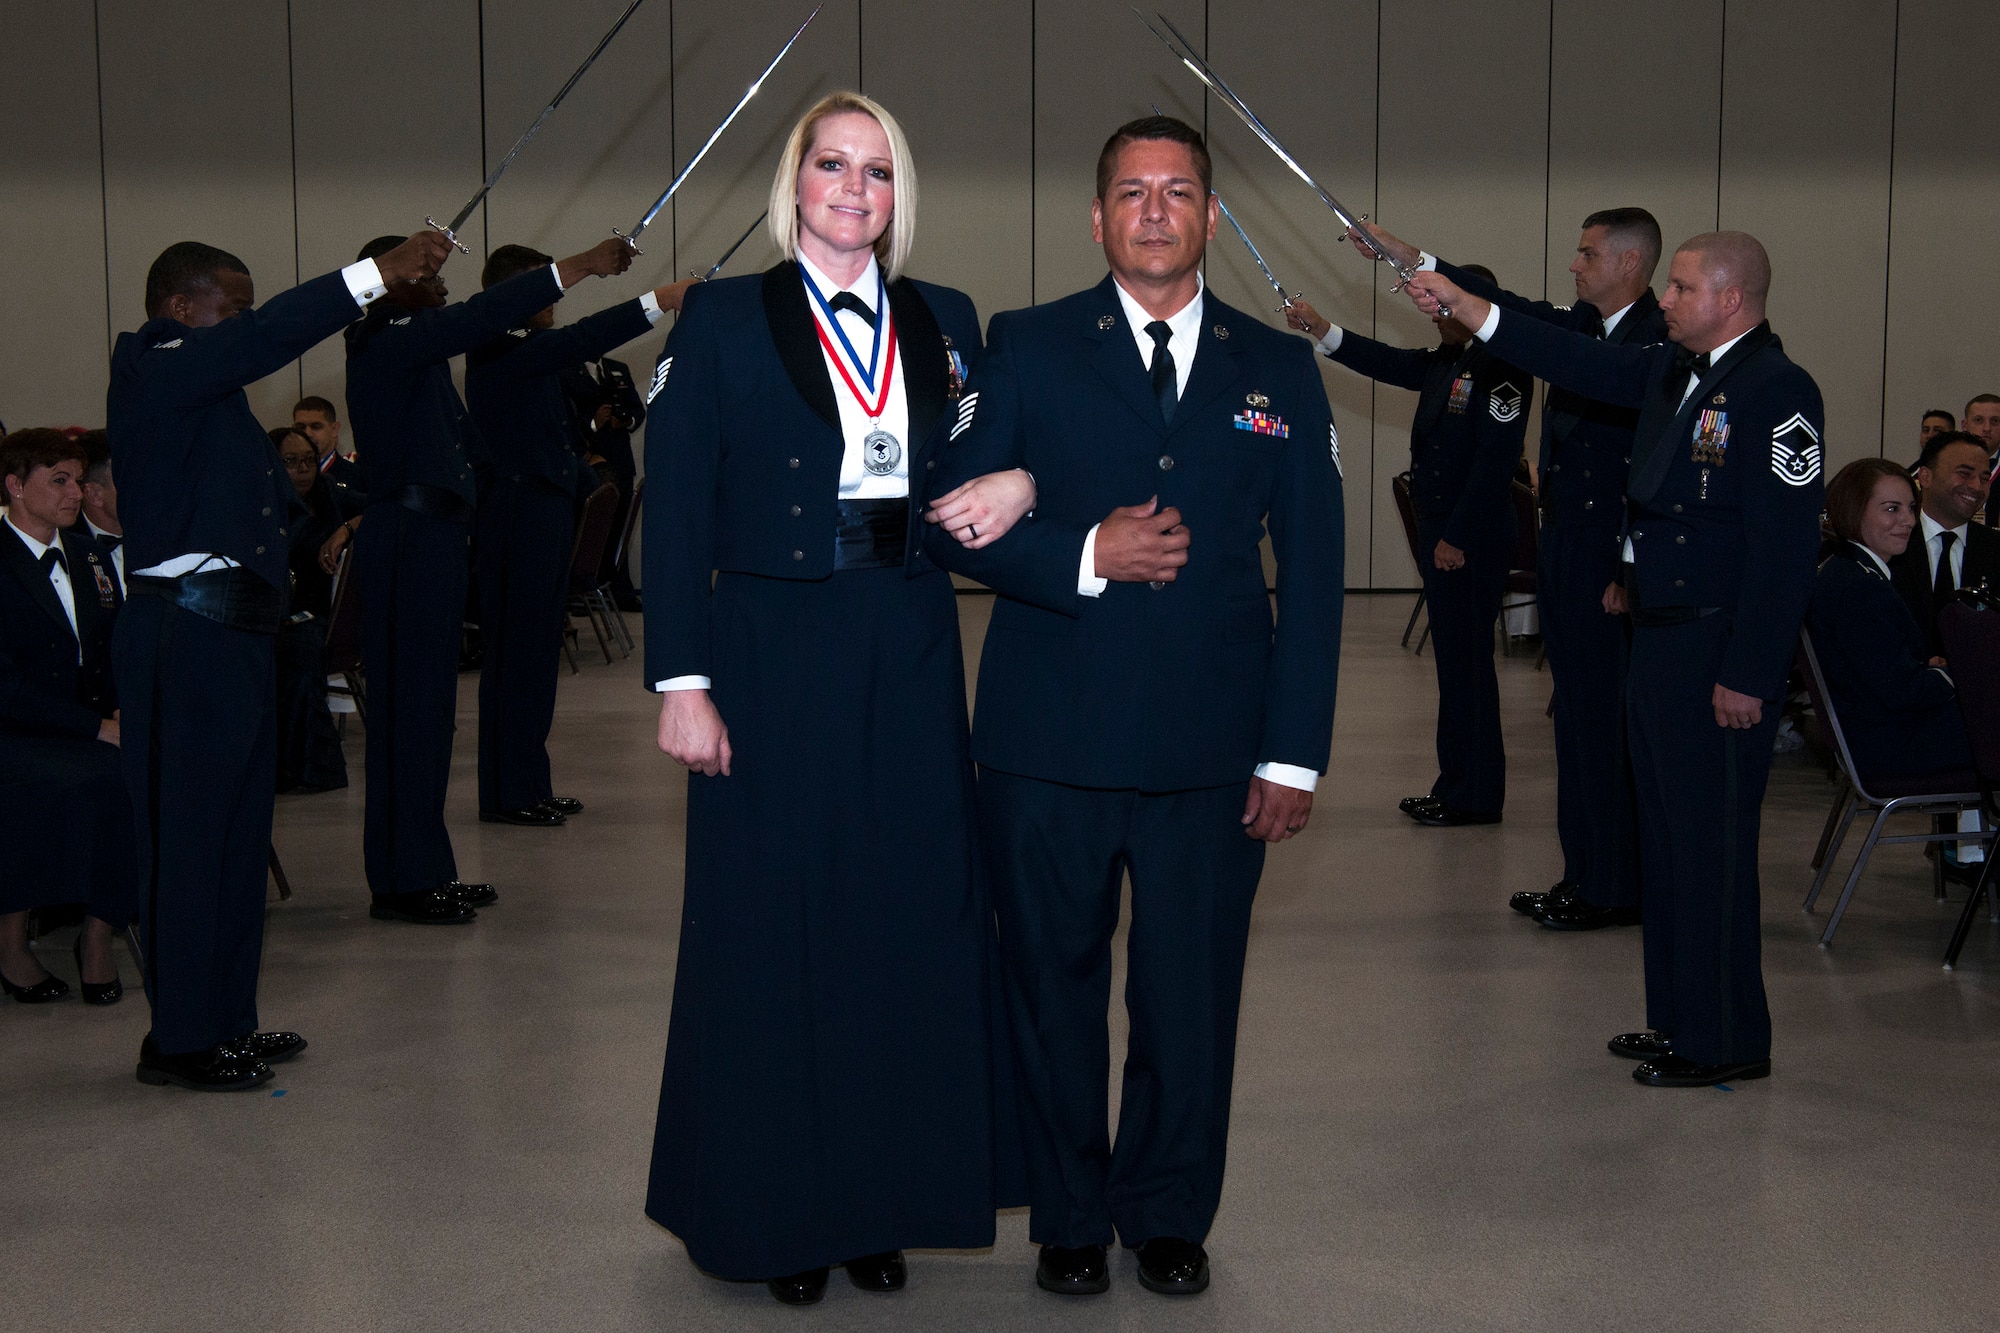 Tech. Sgt. Devon Godinez, left, 74th Aircraft Maintenance Unit support section chief, poses for a photo during Moody’s Senior NCO Induction Ceremony, July 27, 2018, at Moody Air Force Base, Ga. Prior to the ceremony, Moody’s newest and upcoming SNCOs participated in the week-long SNCO Professional Enhancement Seminar, which focused on preparing and equipping them to effectively lead and manage Airmen in an ever-changing Air Force. Godinez said the seminar broadened her perspective as a leader and is excited to implement the principles learned from the unique experience. (U.S. Air Force photo by Airman 1st Class Eugene Oliver)